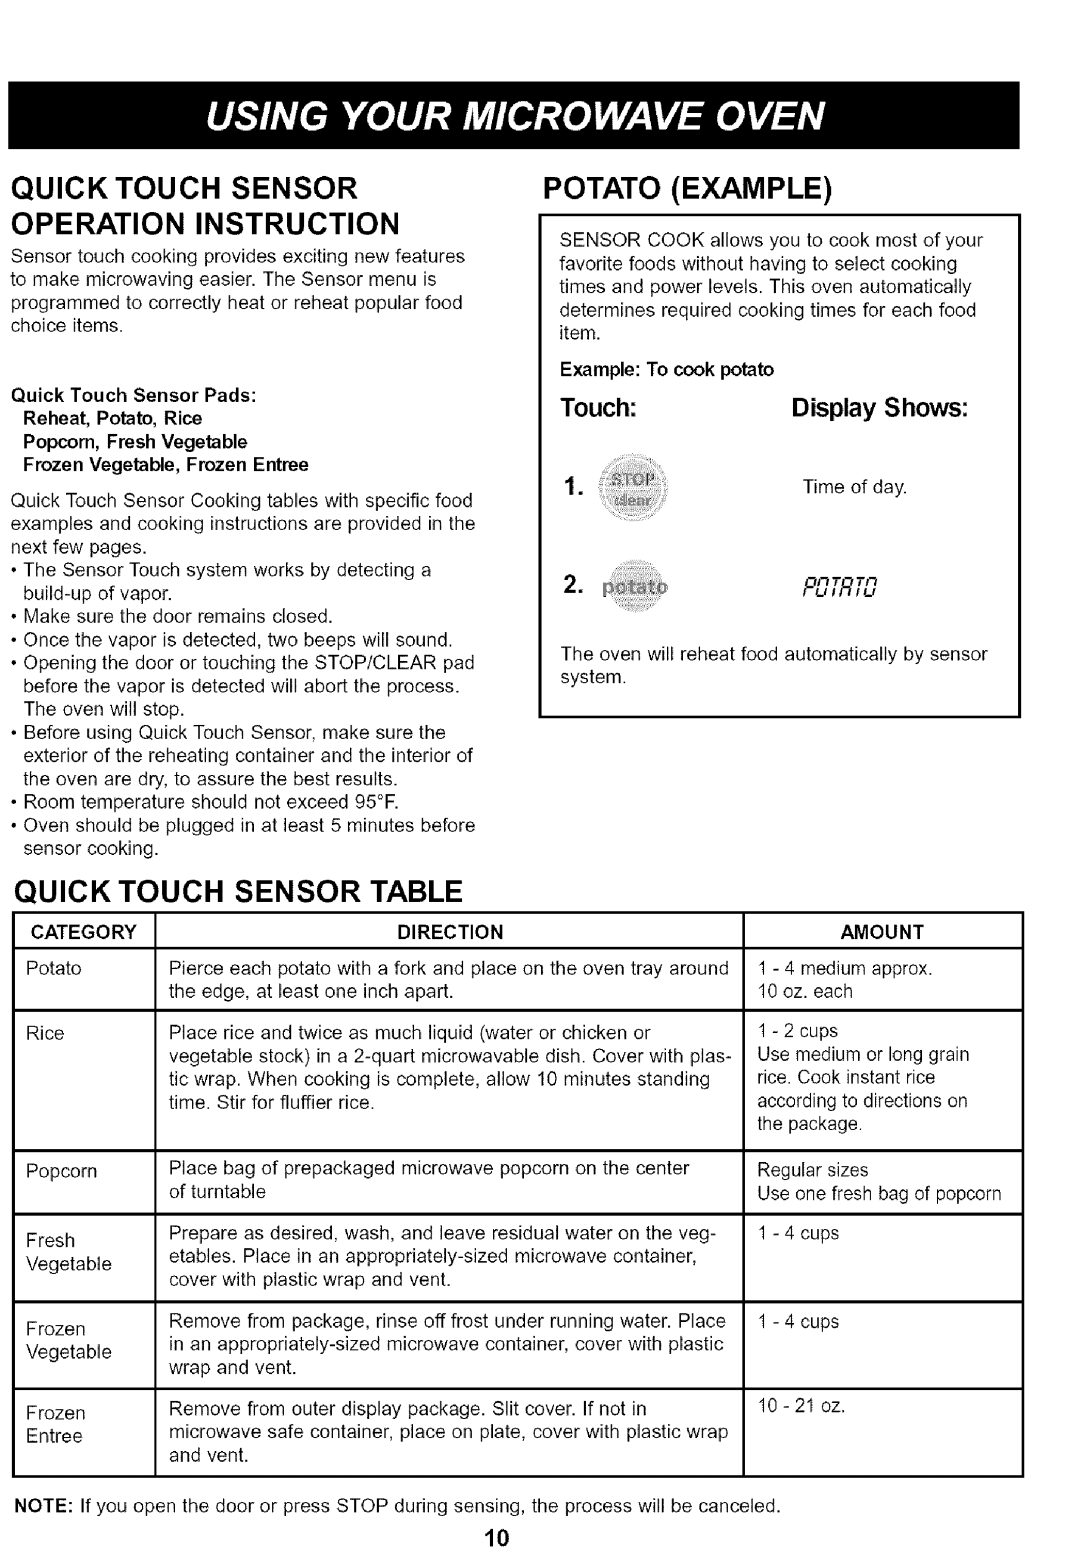 Kenmore 721.65222 manual Quick Touch Sensor Operation Instruction, Potato Example, Quick Touch Sensor Table, Display Shows 